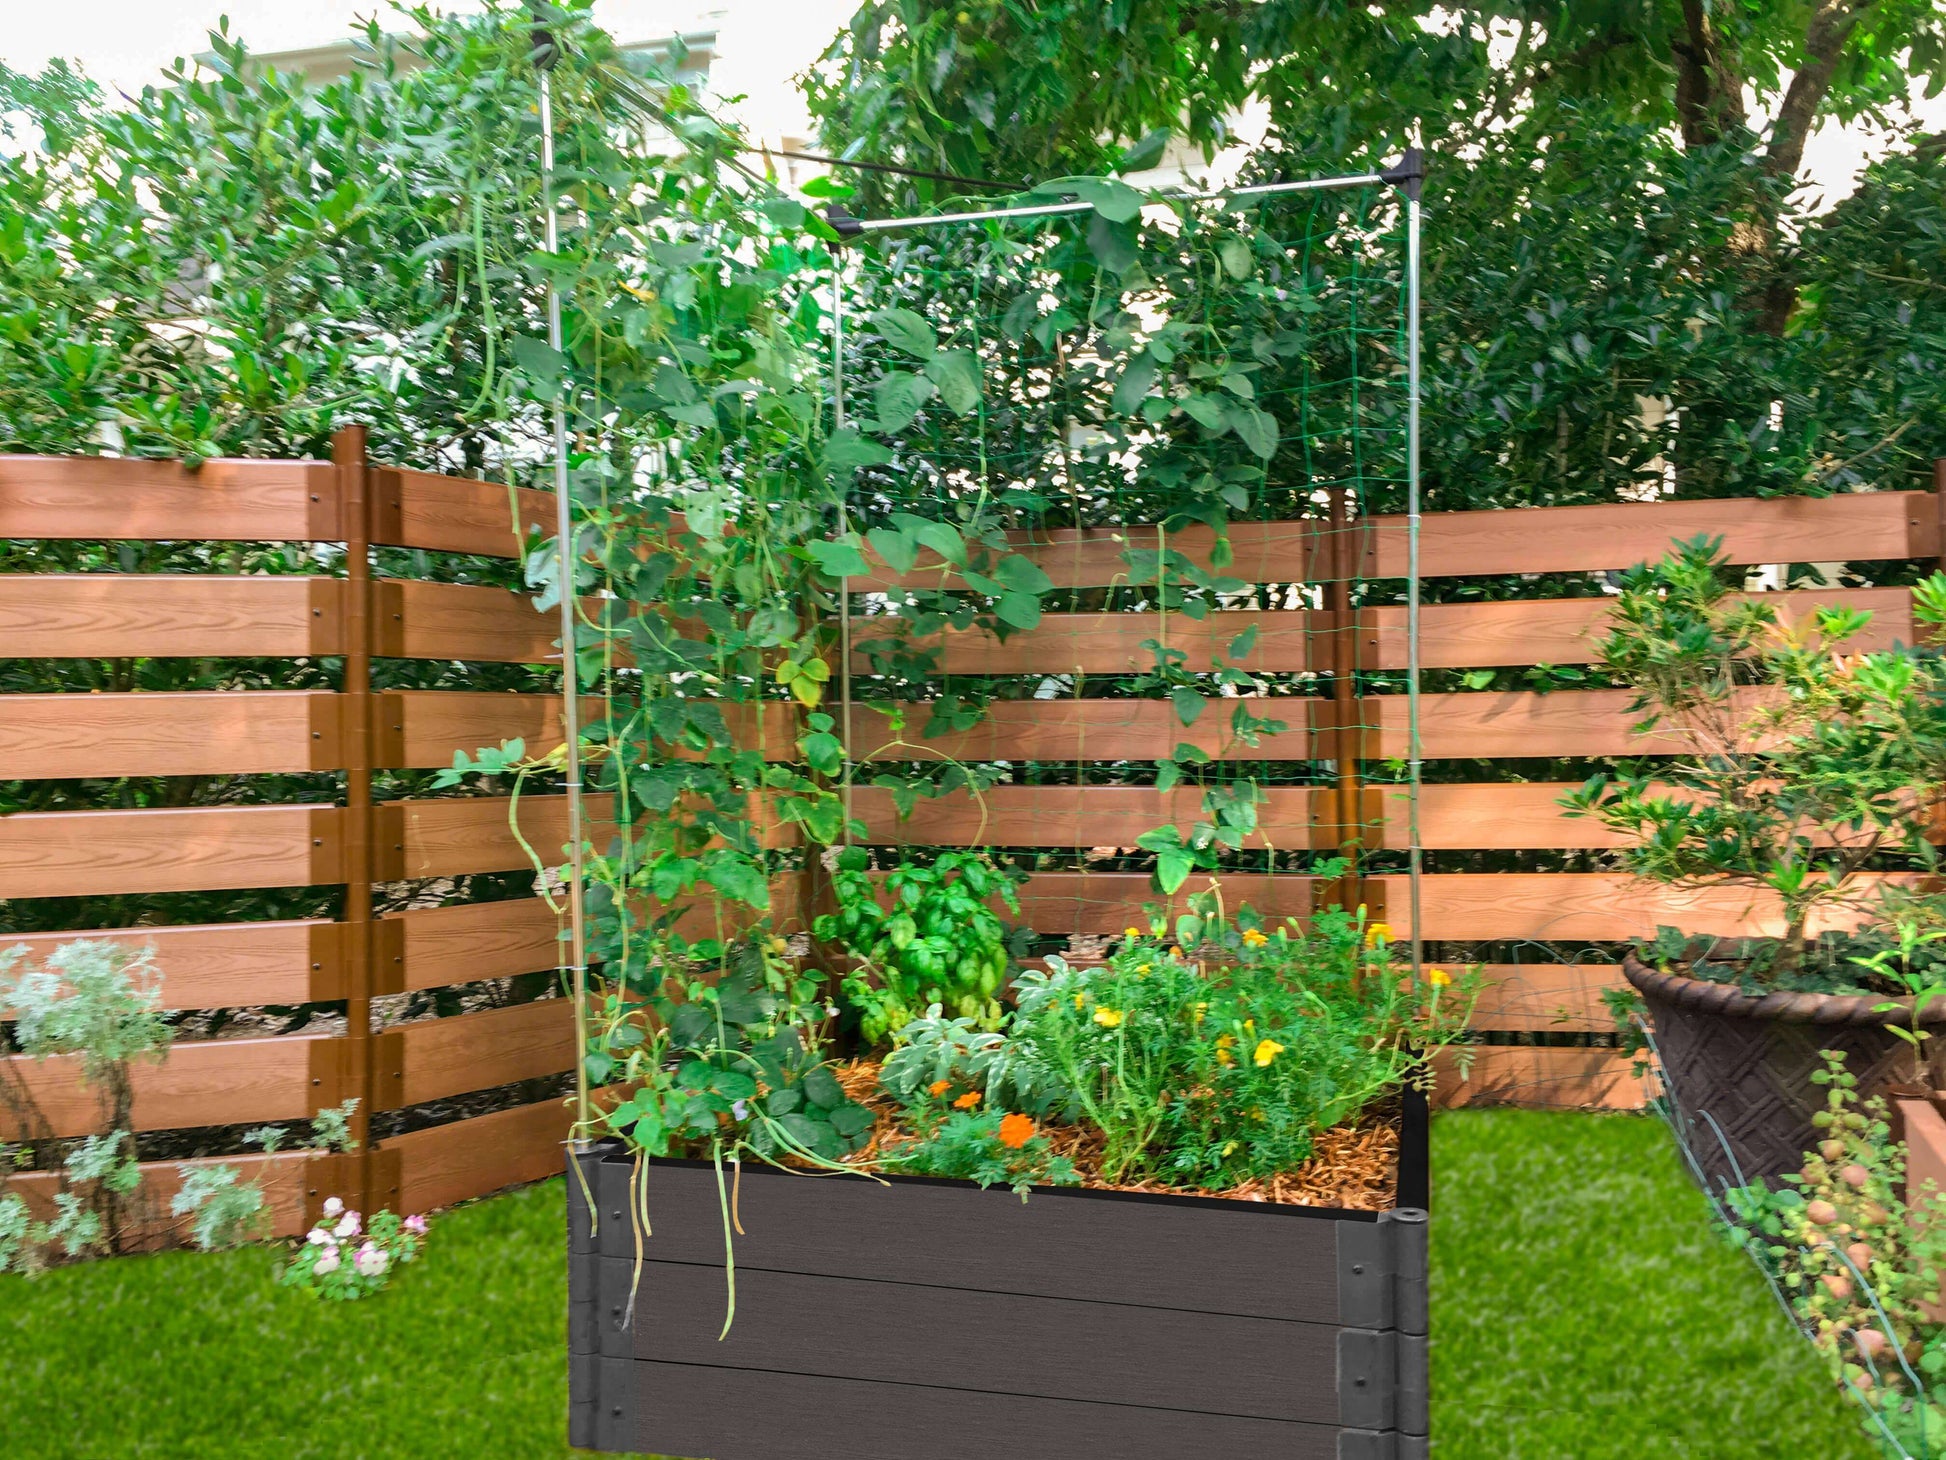 4' x 4' Raised Garden Bed with Trellis Raised Garden Beds Frame It All Weathered Wood 2" 3 = 16.5"